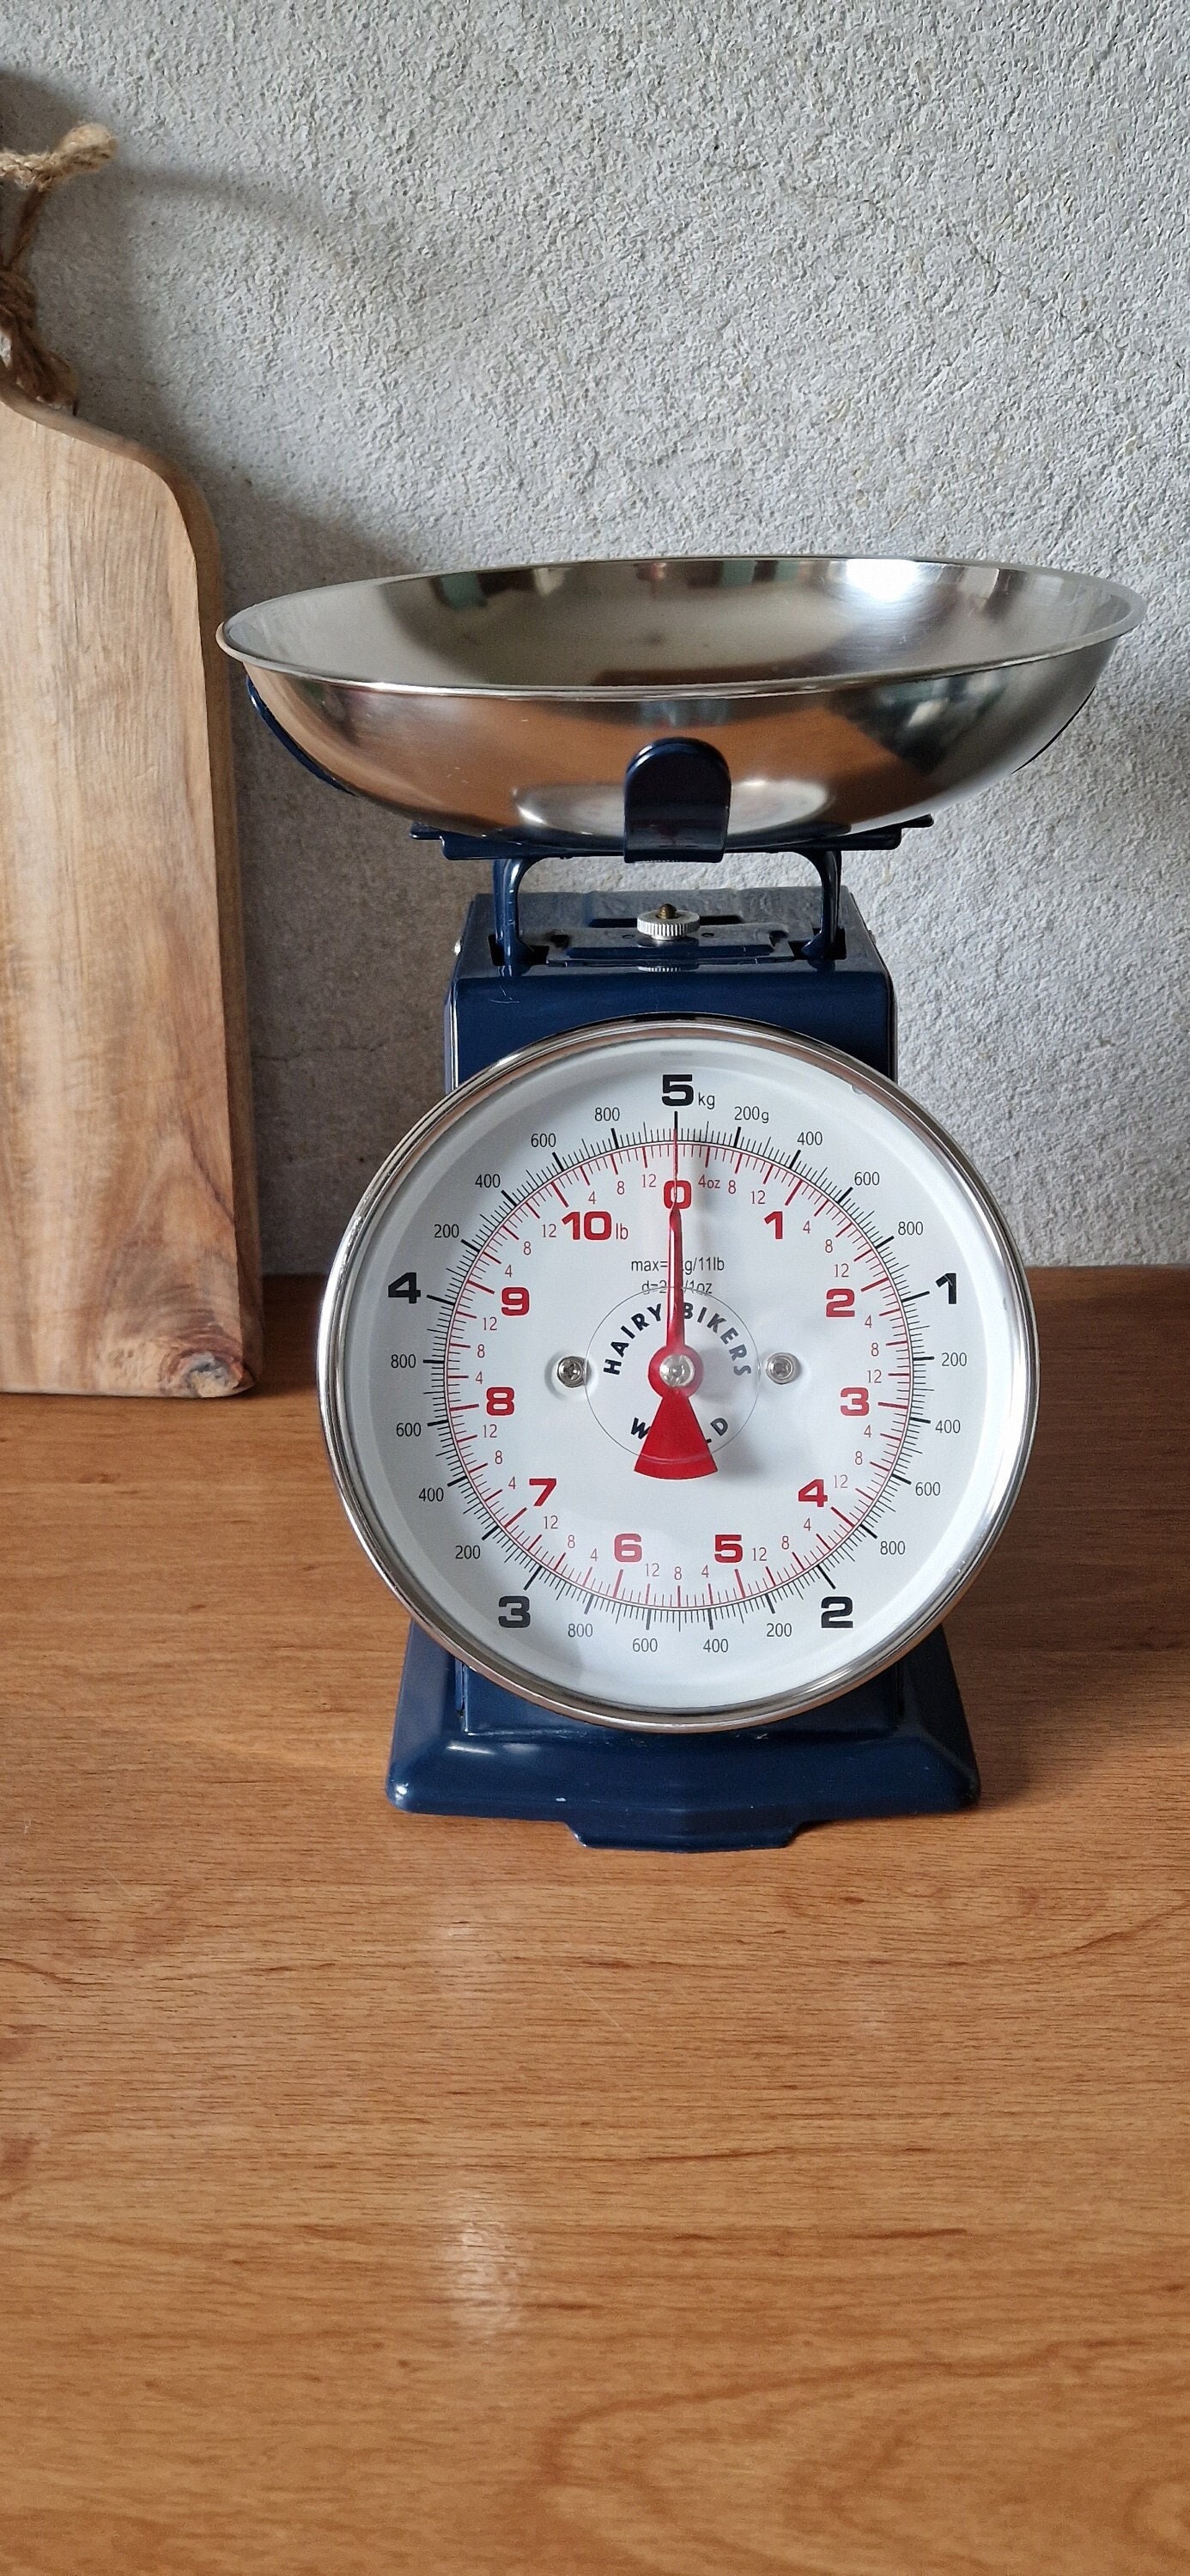 Retro Kitchen Scales 5KG Traditional Weighing Cooking Baking Mechanical  Vintage